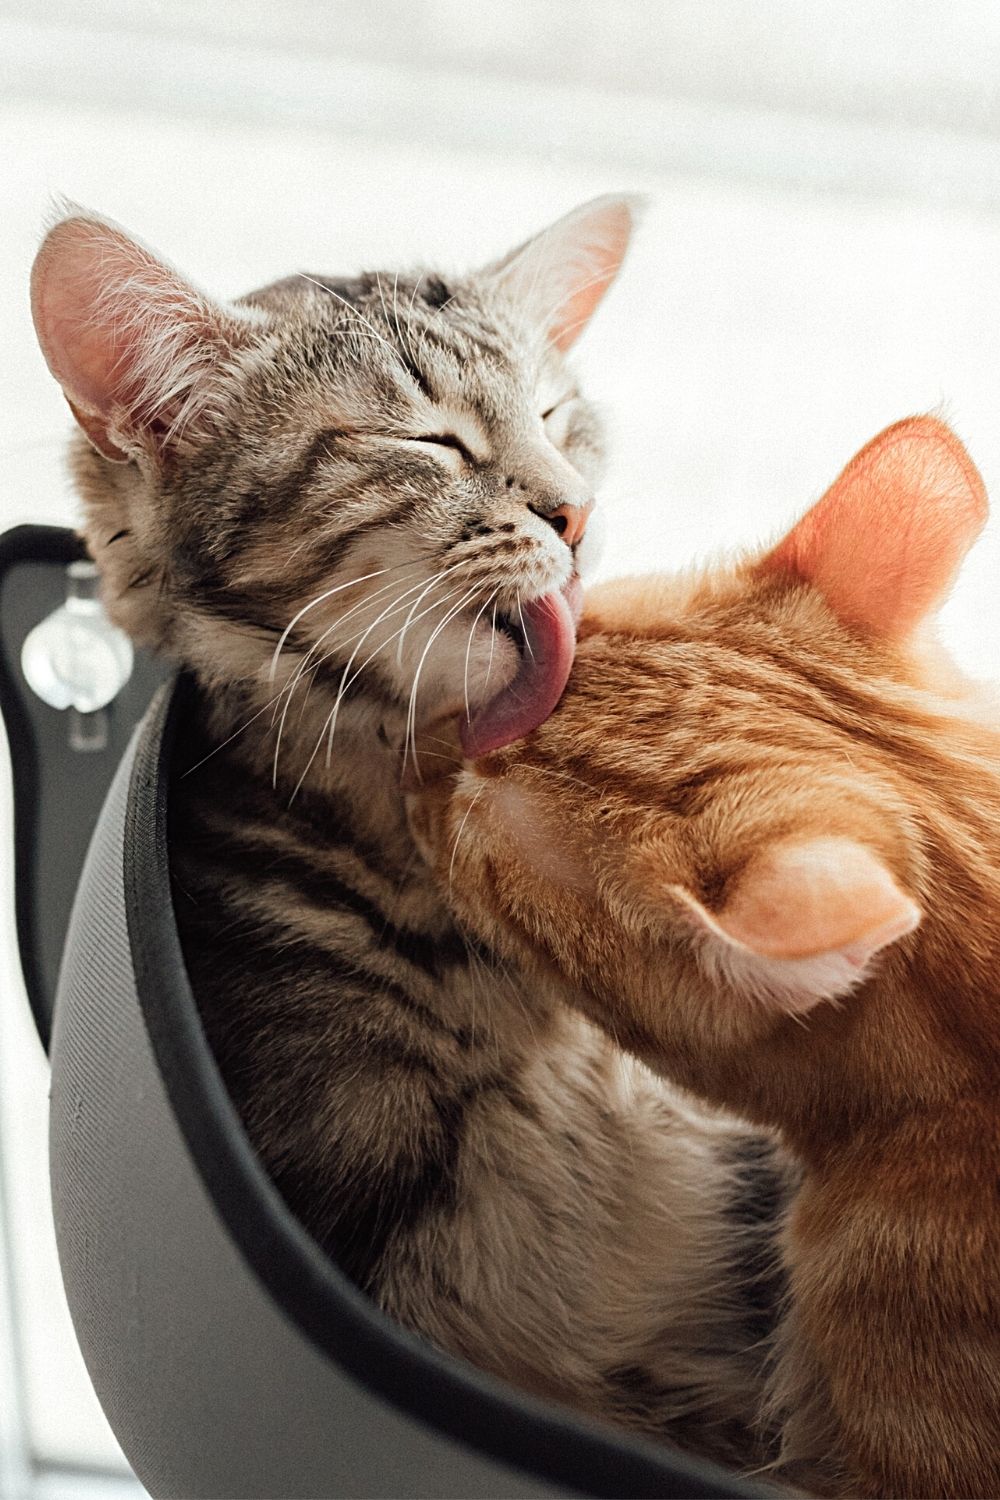 Cats love to groom each other, which includes licking each other's ears